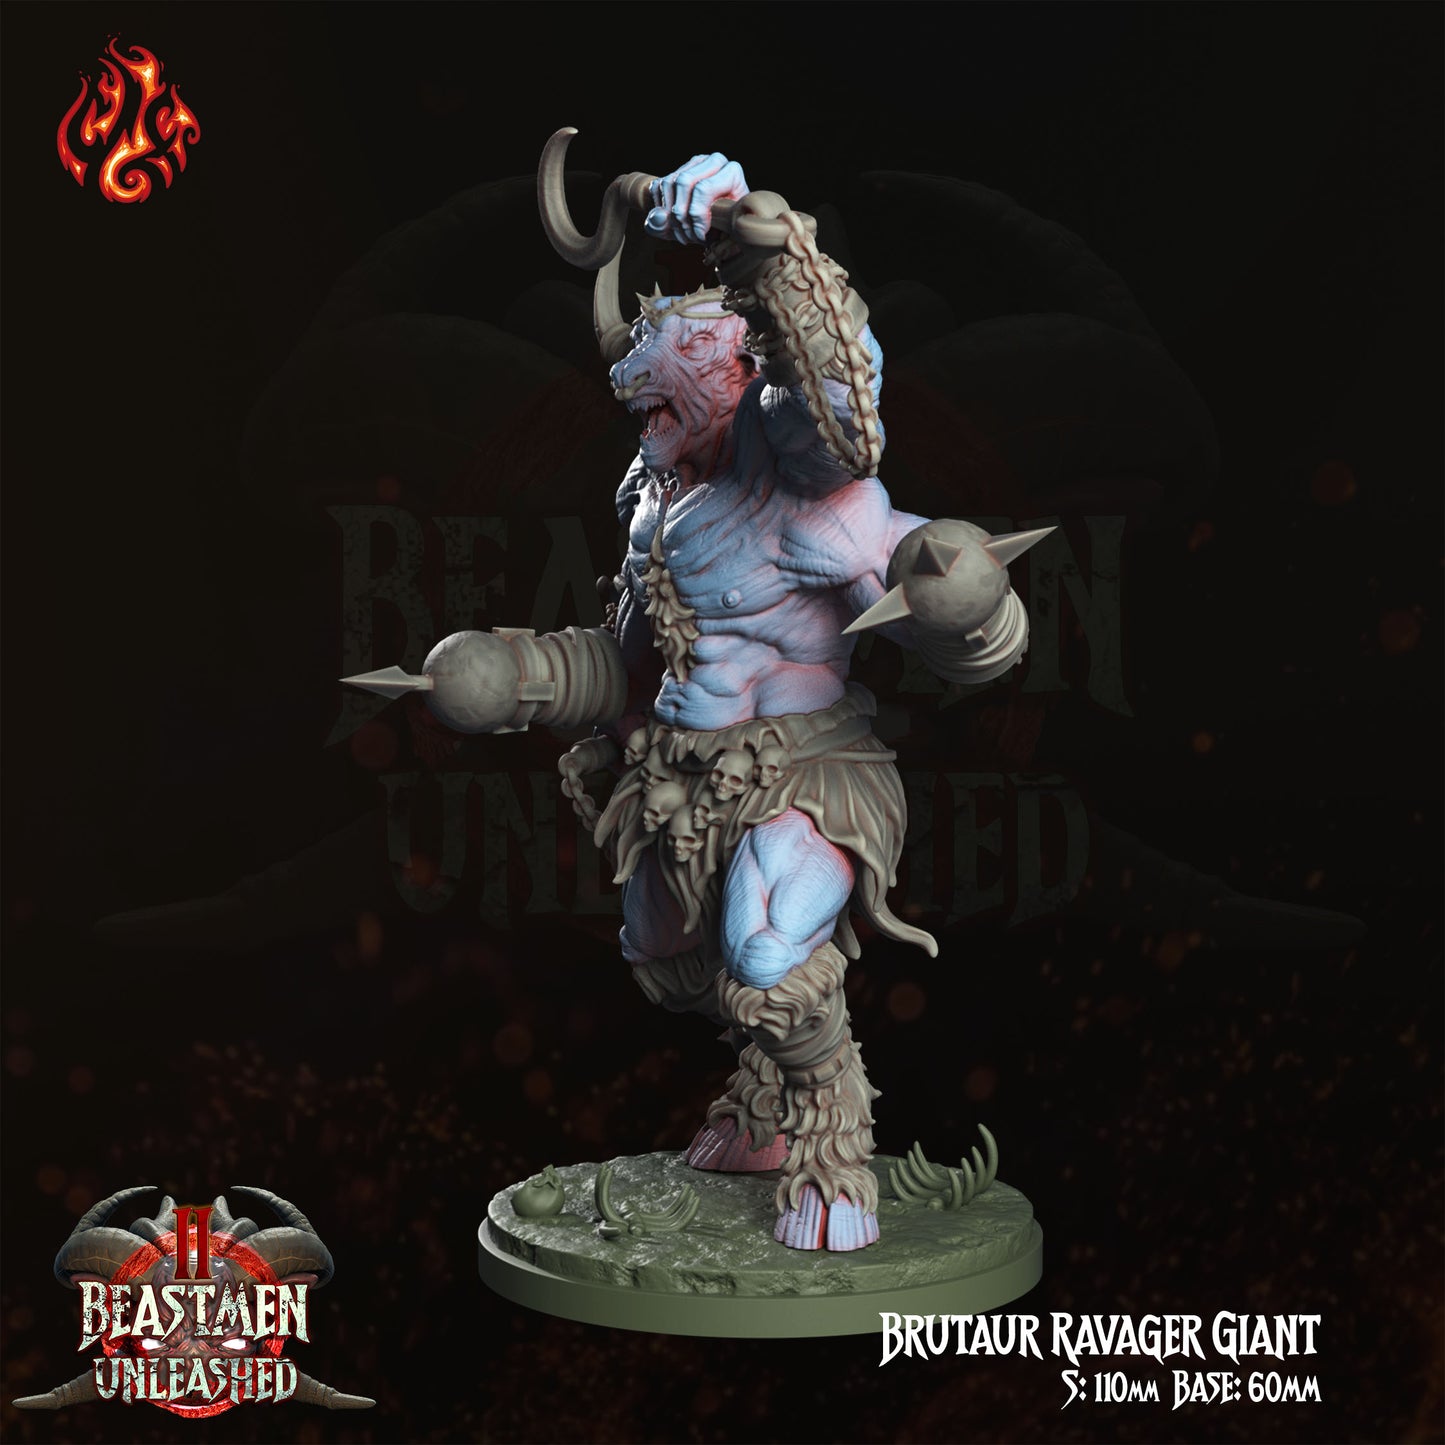 Brutaur Ravager Giant - Beastmen Unleashed - from Crippled God Foundry - Table-top gaming mini and collectable for painting.